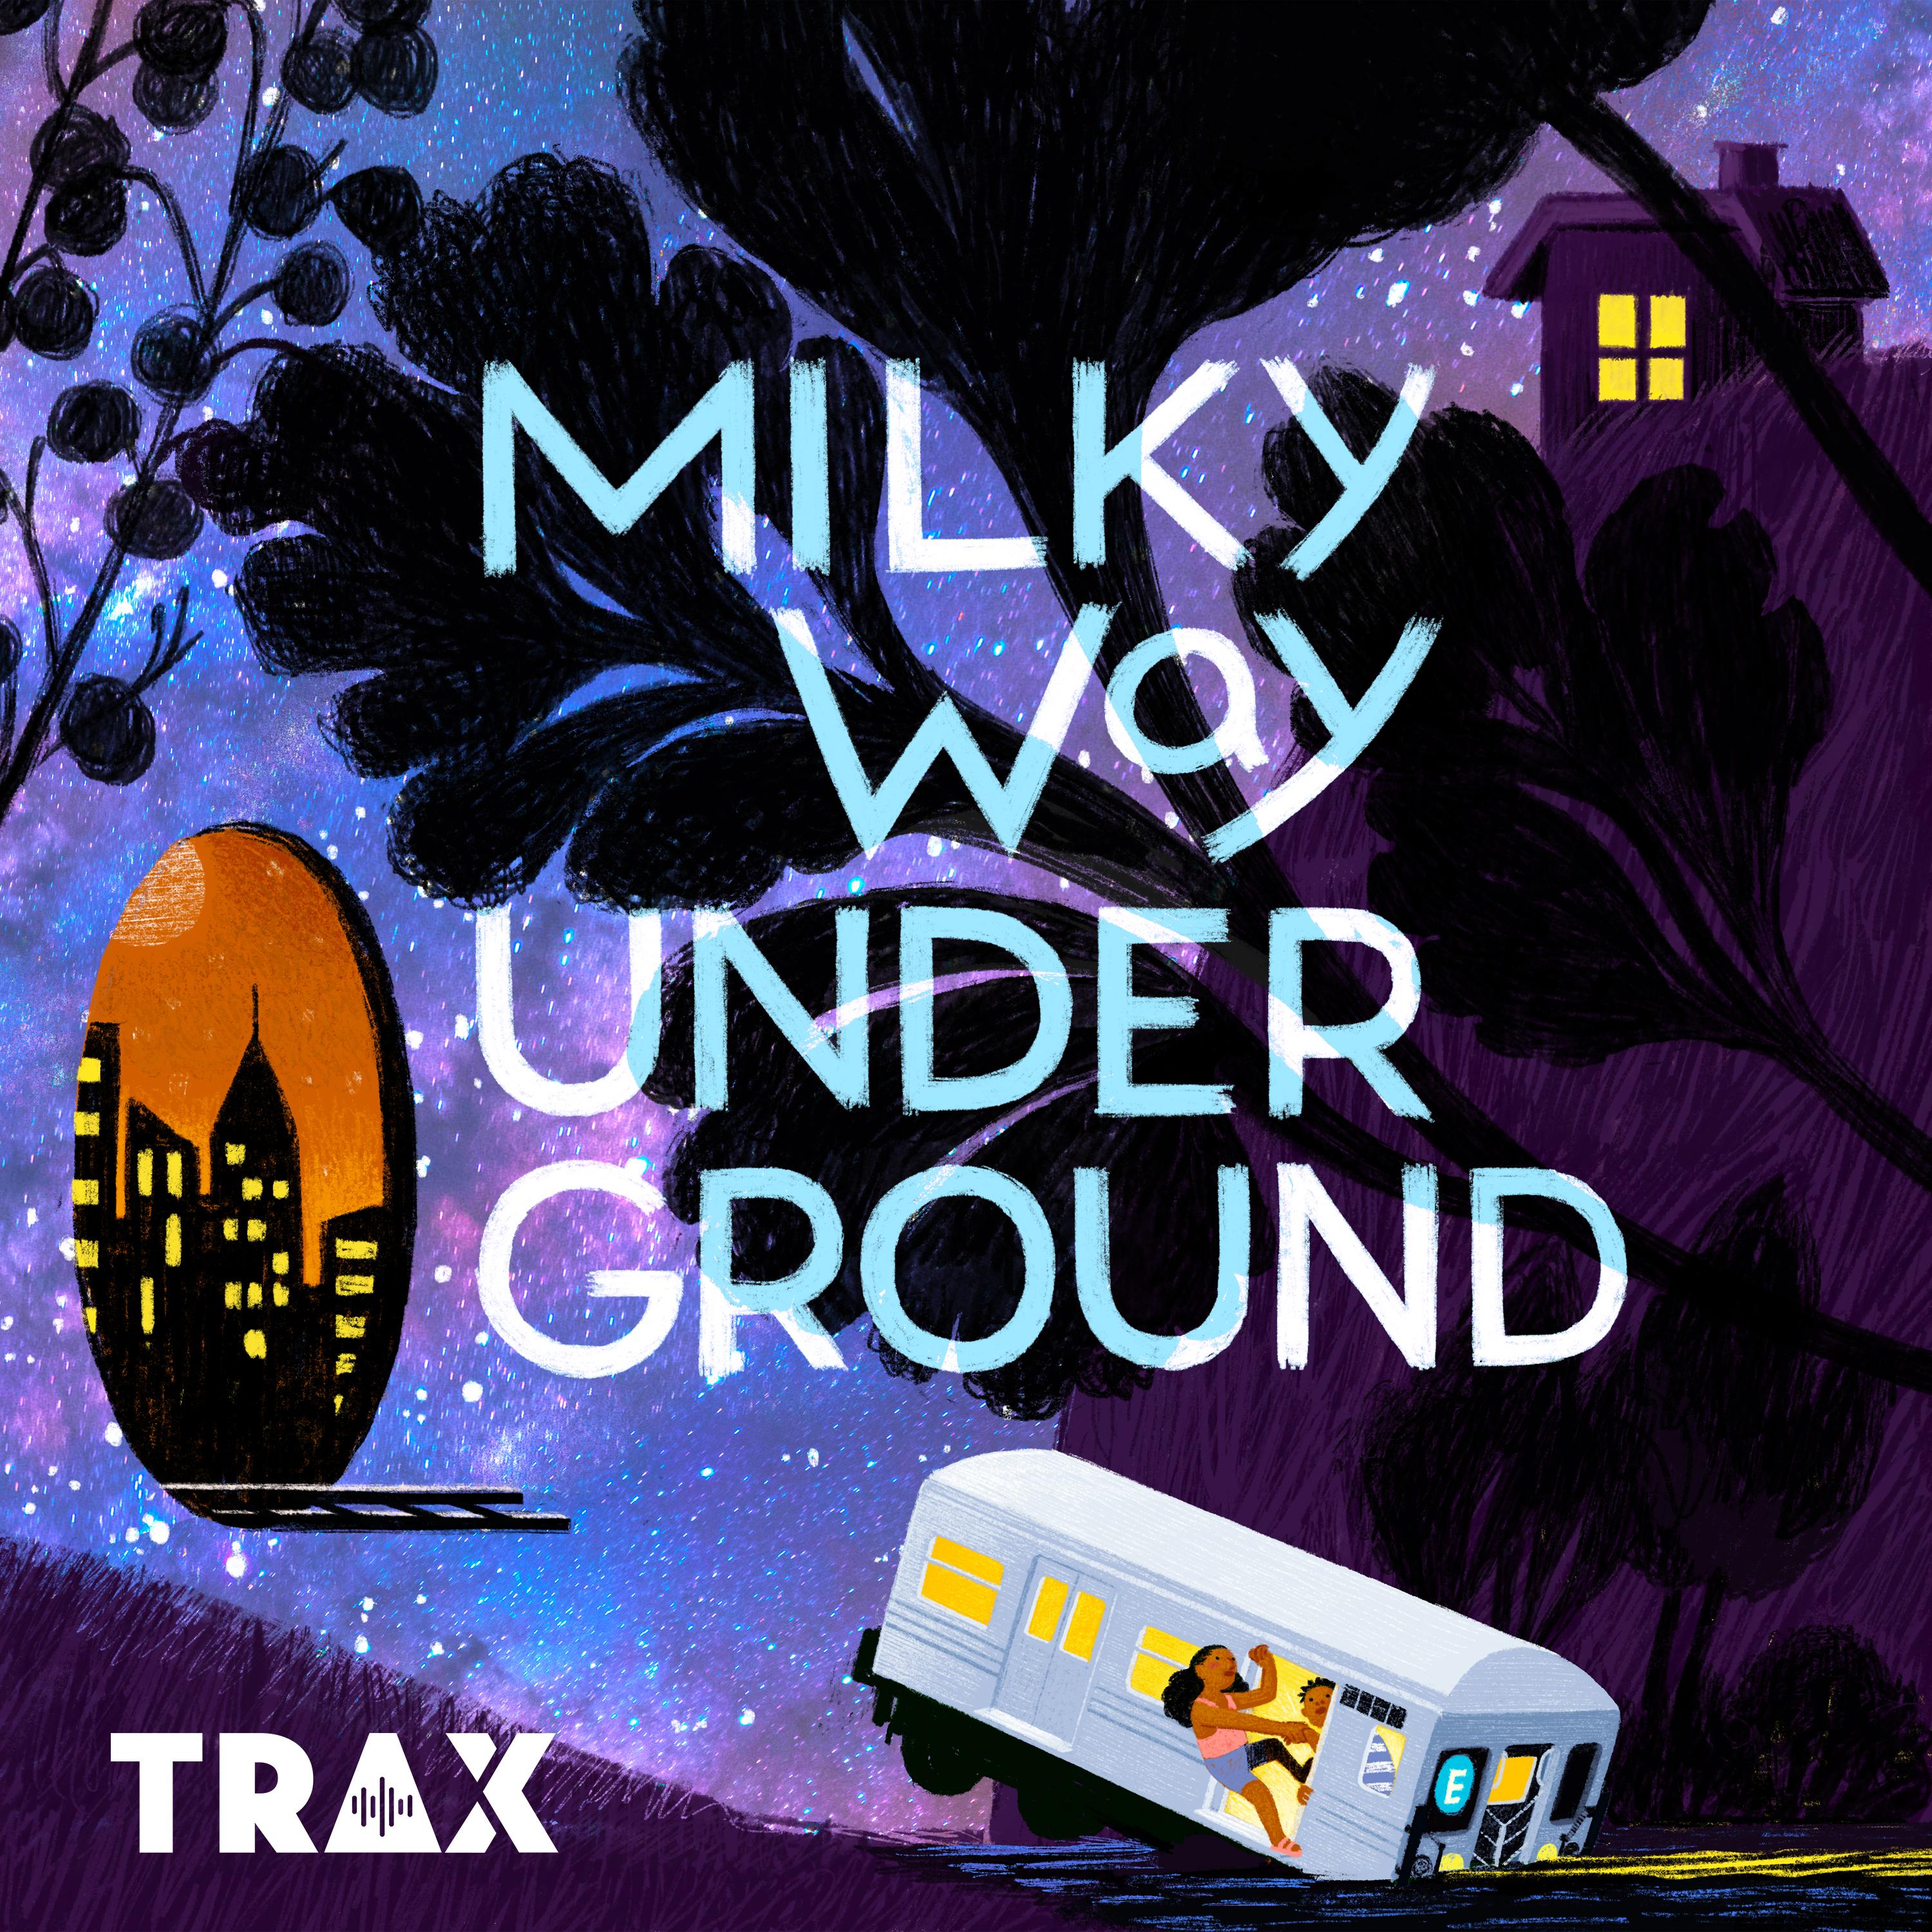 Thumbnail for "Introducing Milky Way Underground".